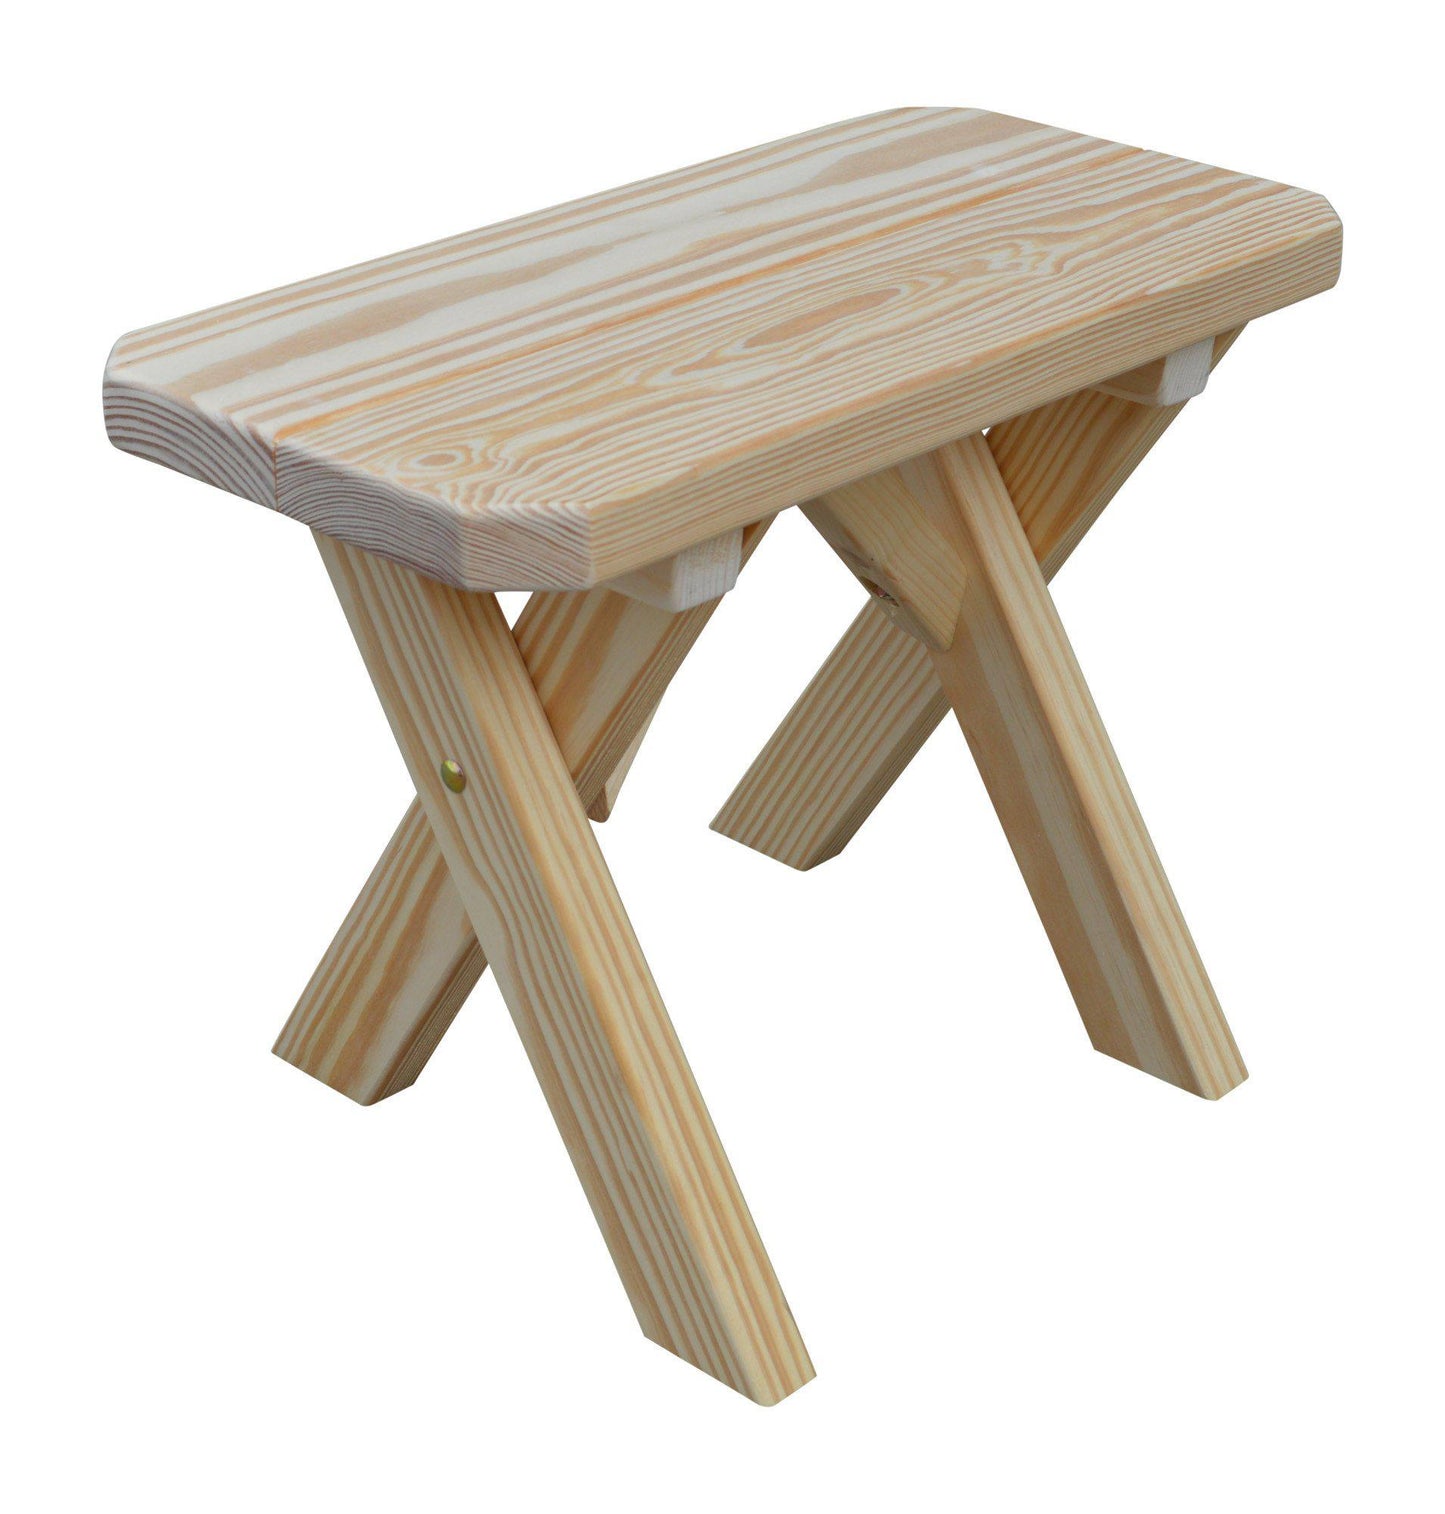 A&L Furniture Co. Yellow Pine  23" Crossleg Bench Only - LEAD TIME TO SHIP 10 BUSINESS DAYS